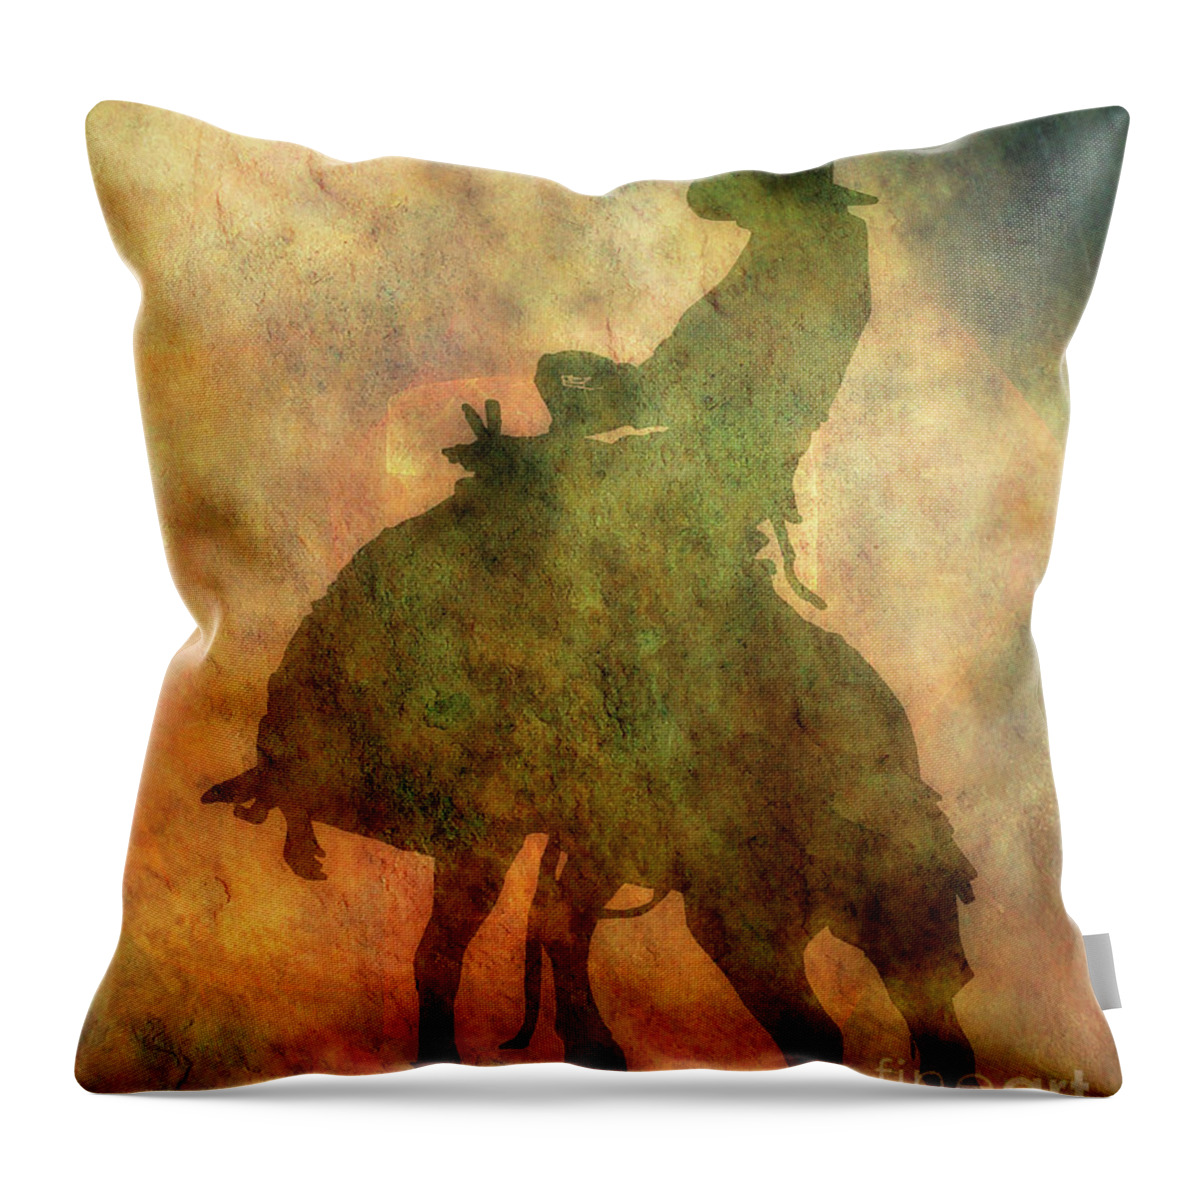 Rodeo Bronco Riding Silhouette Throw Pillow featuring the digital art Rodeo Bronco Riding Silhouette by Randy Steele